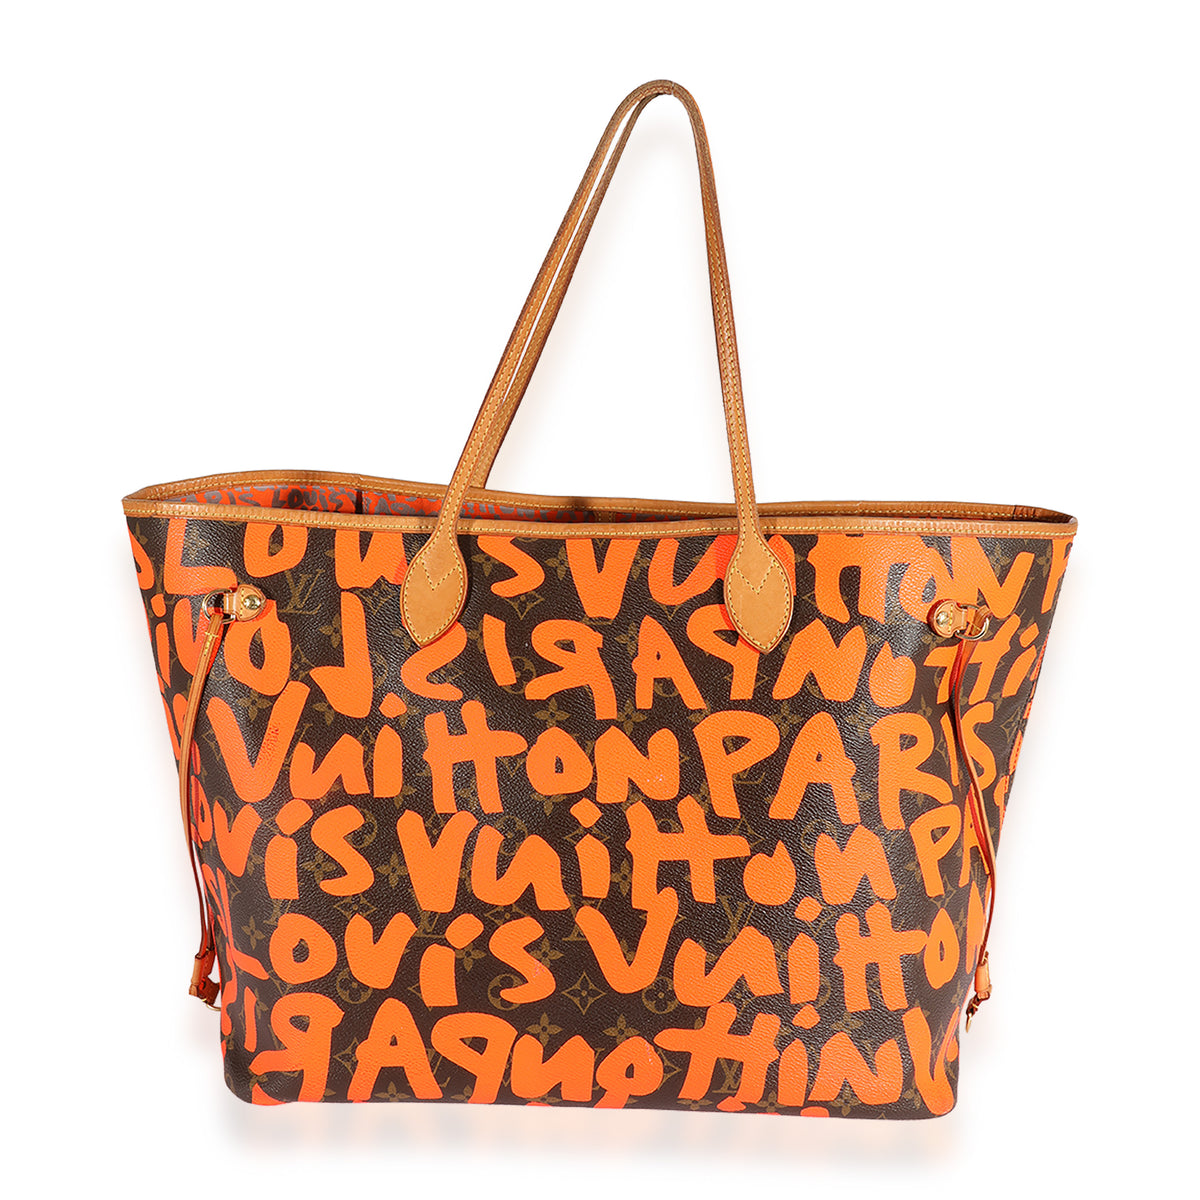 Louis Vuitton - Authenticated Neverfull Handbag - Cloth Orange for Women, Very Good Condition